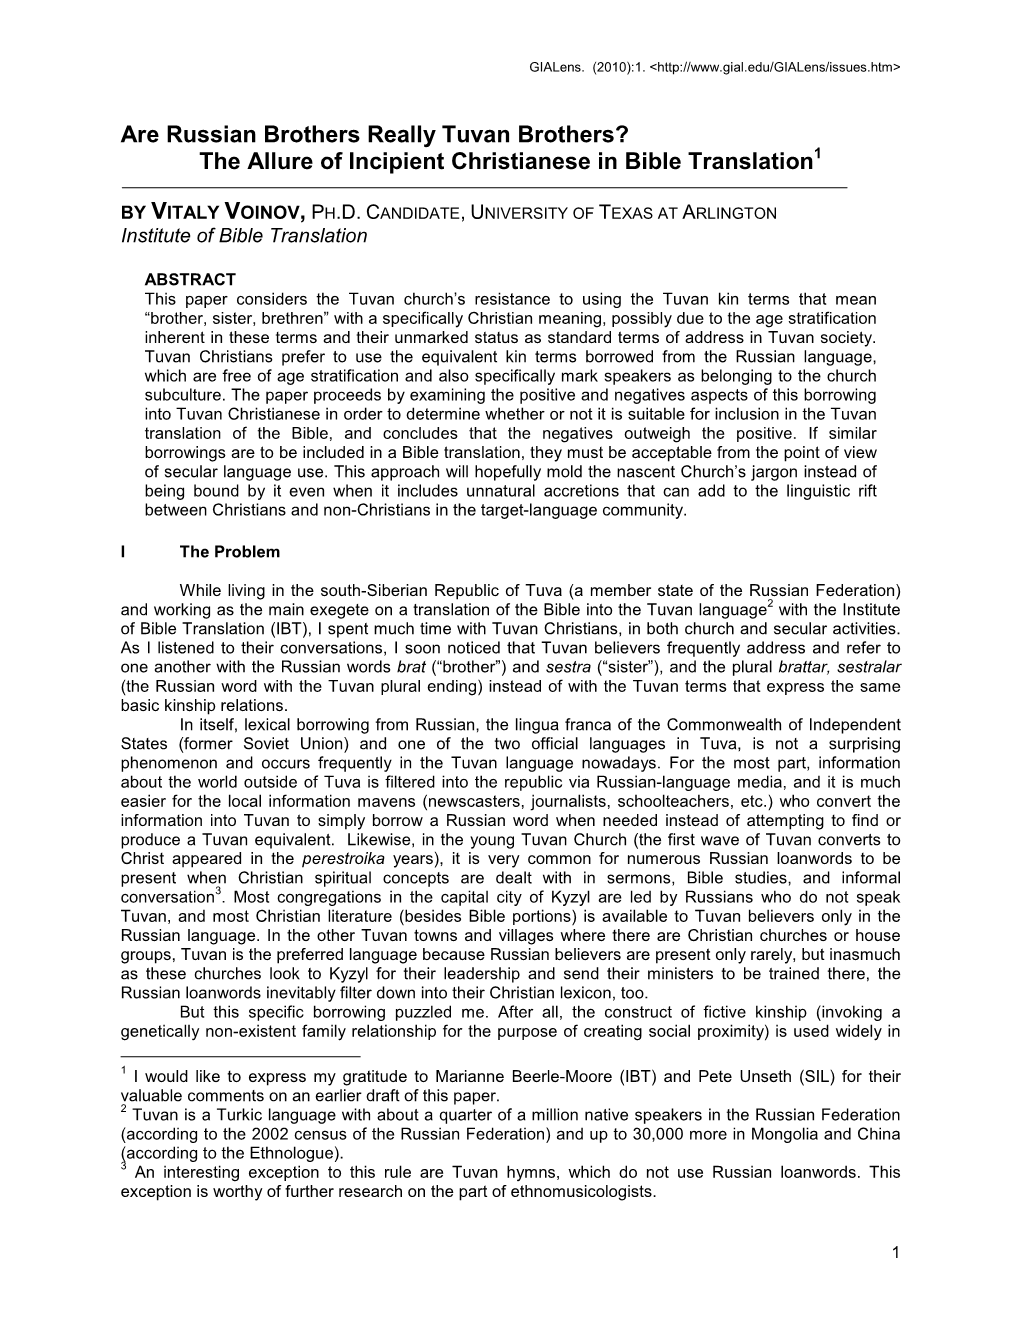 The Allure of Incipient Christianese in Bible Translation 1